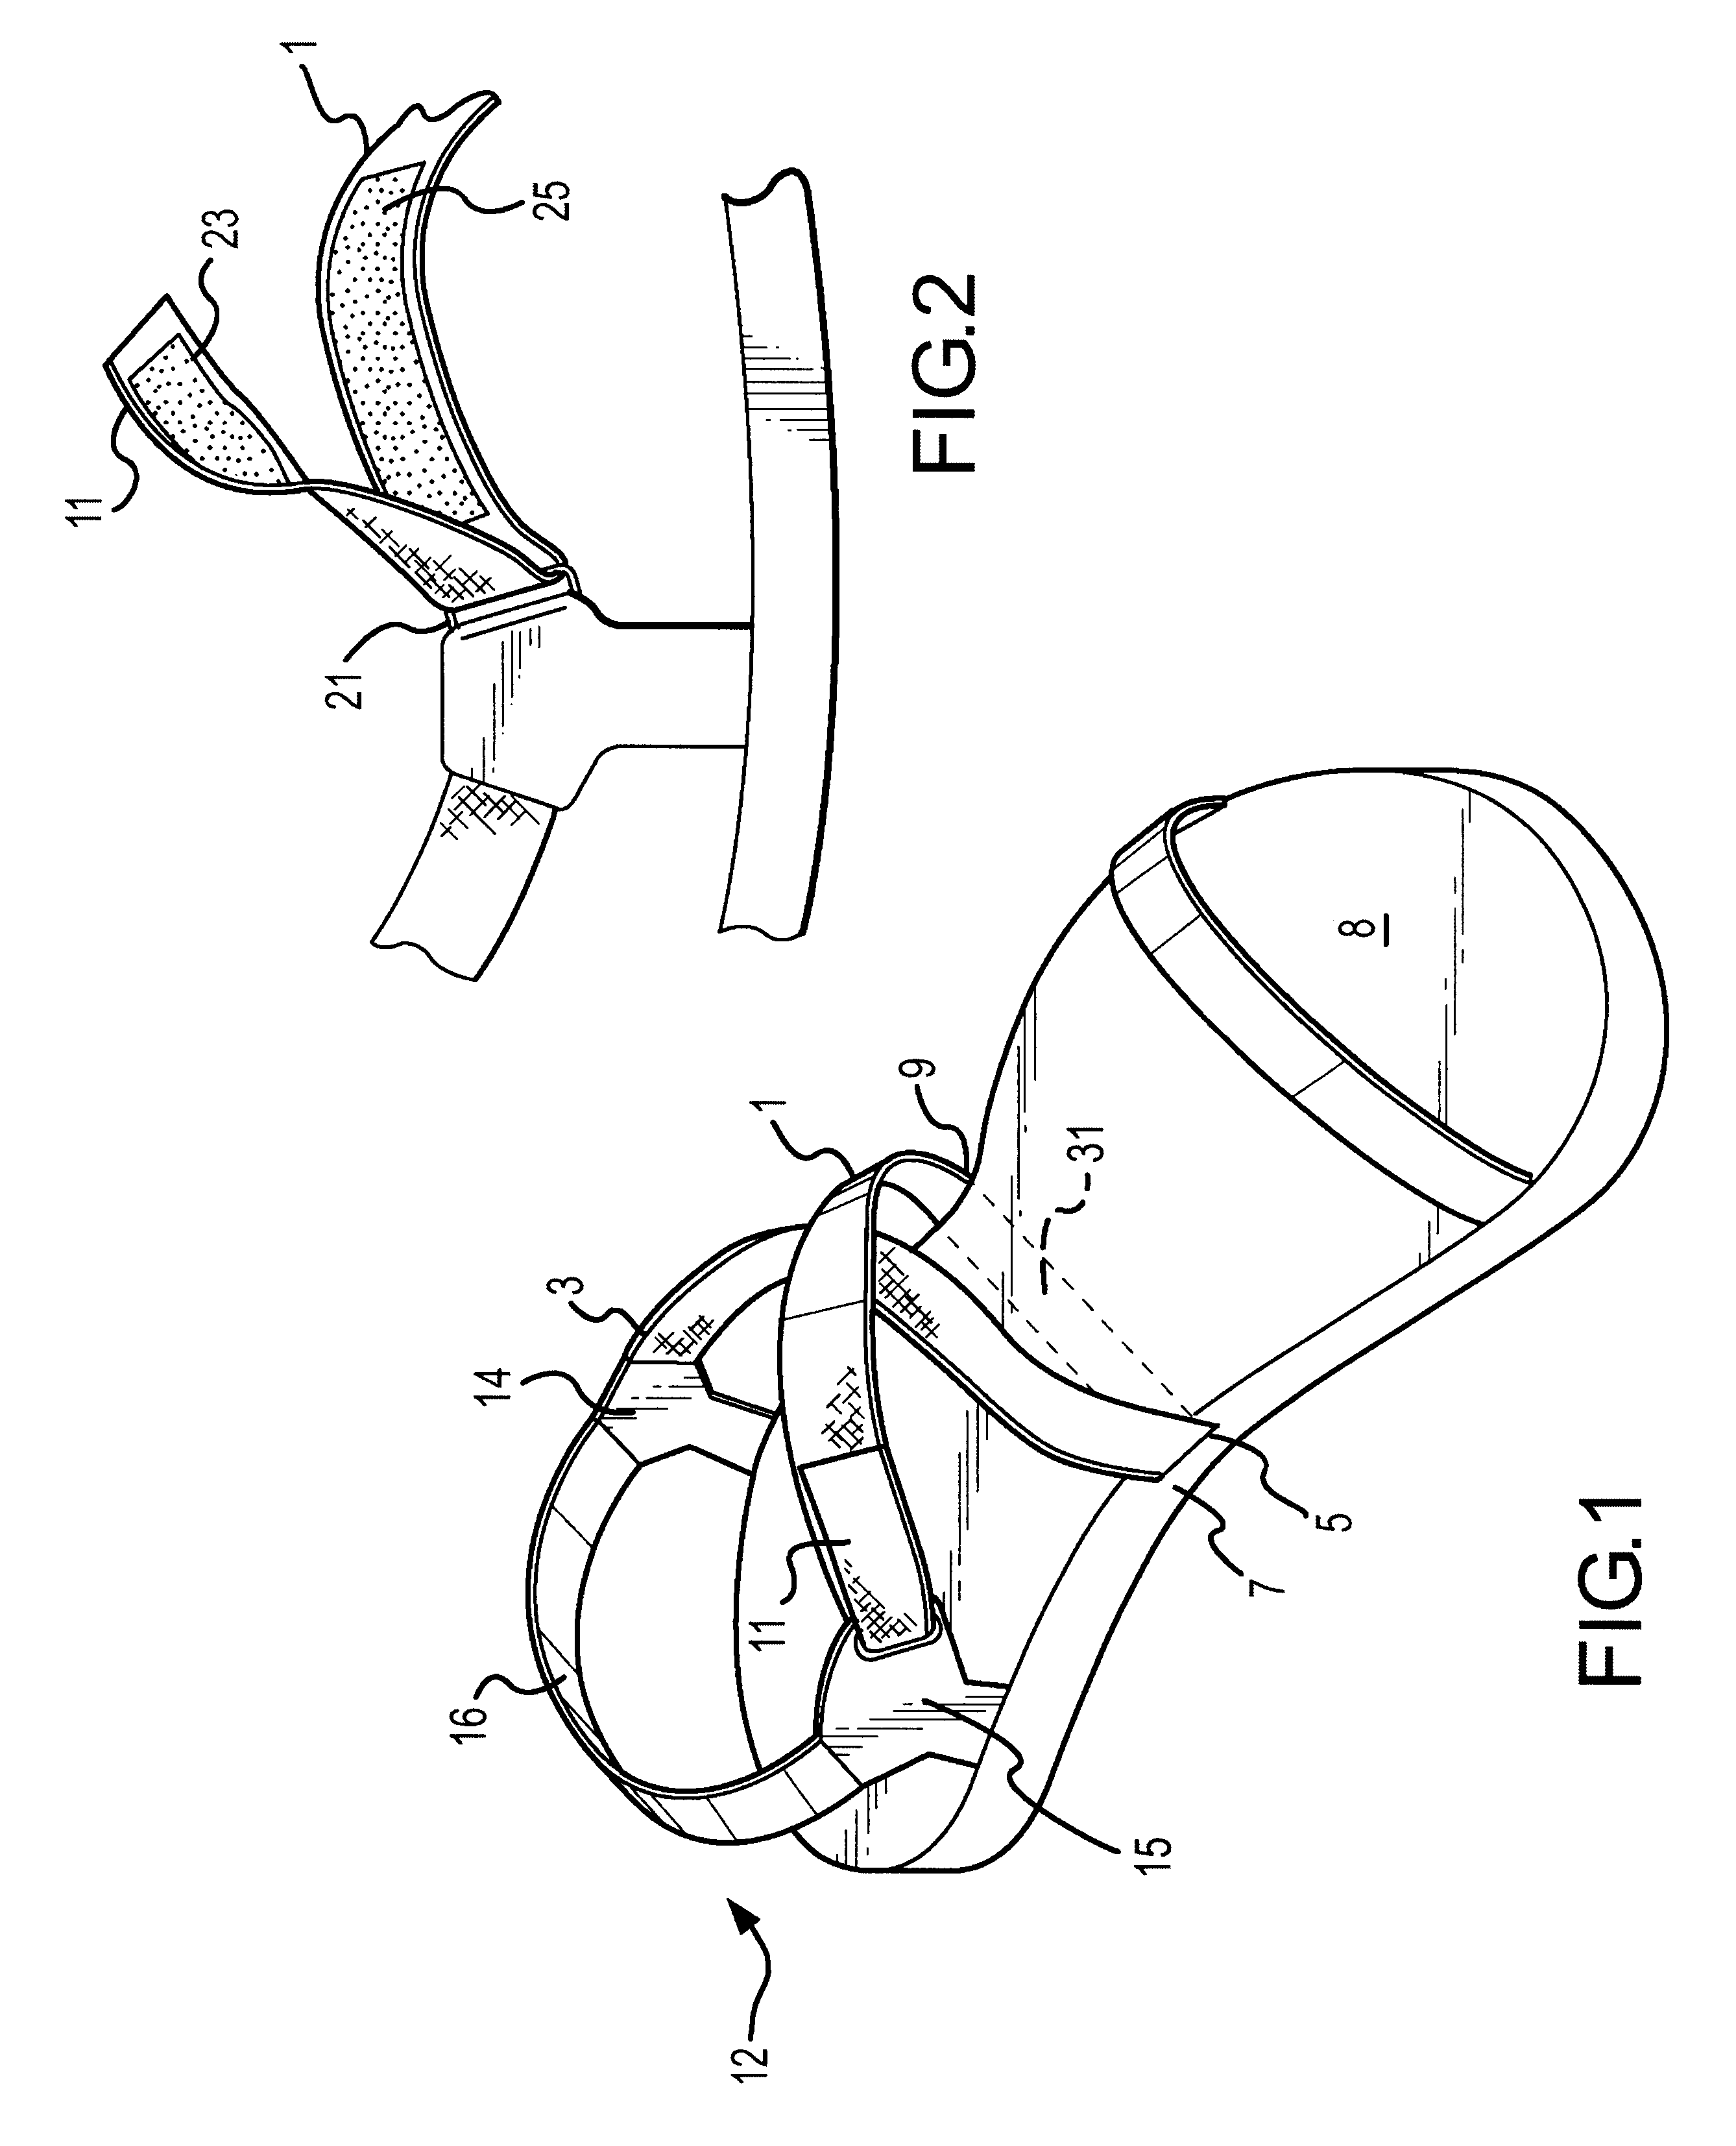 Footwear sole and arch strapping system